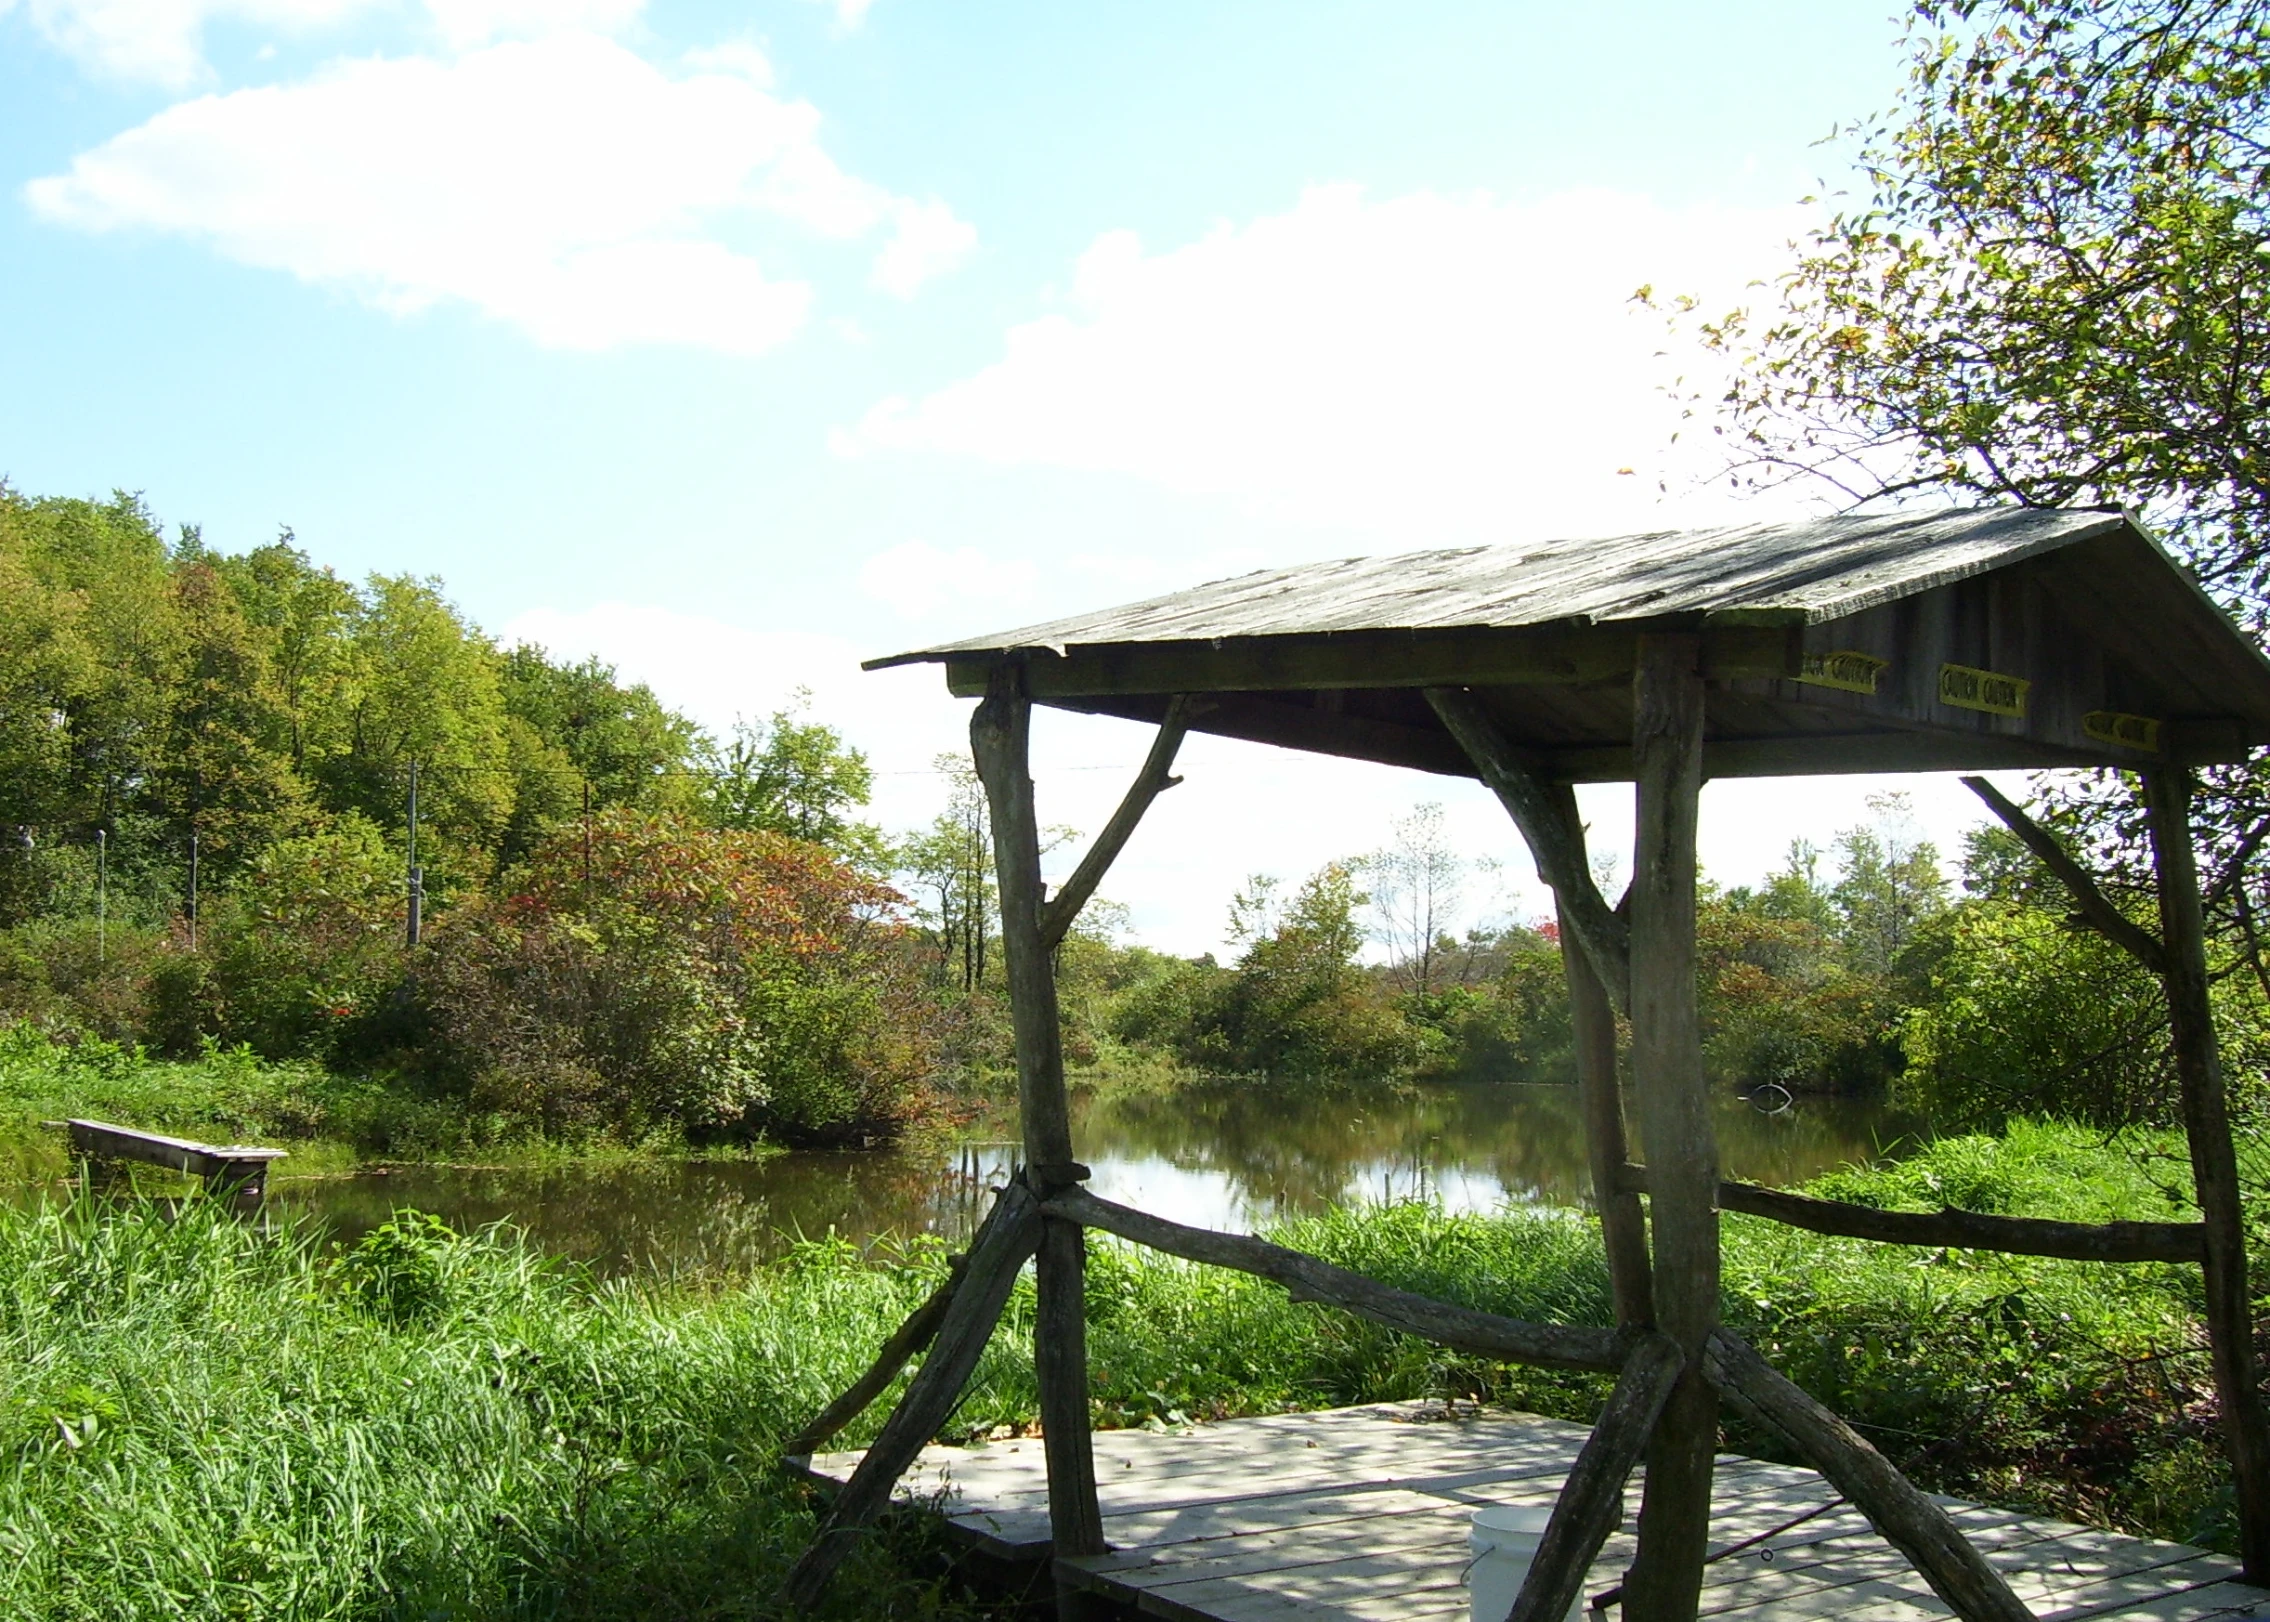 a wooden platform in a green grassy area